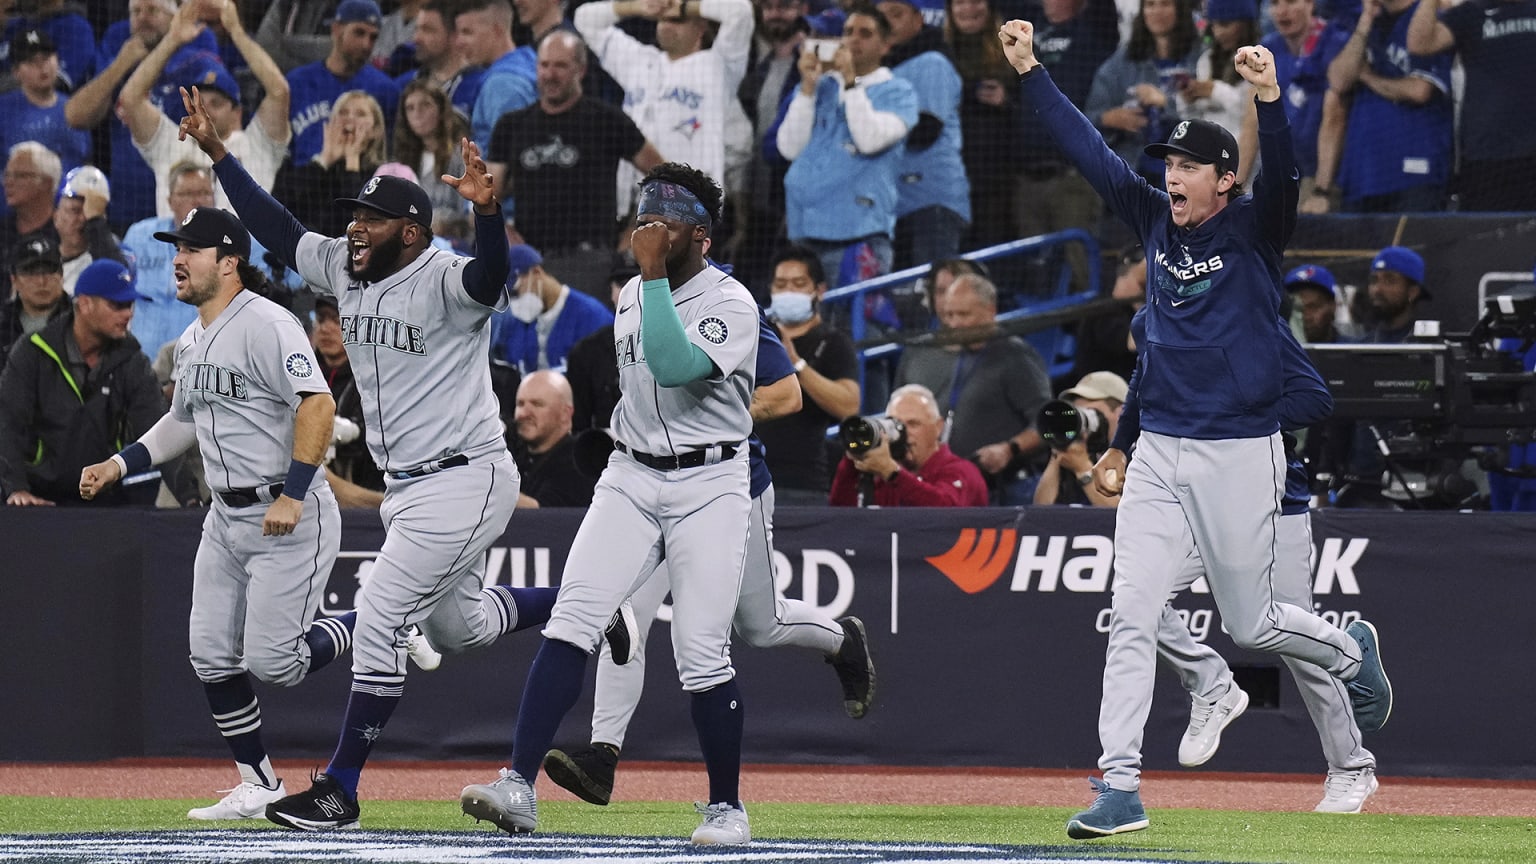 Mariners players run on to the field after defeating the Blue Jays